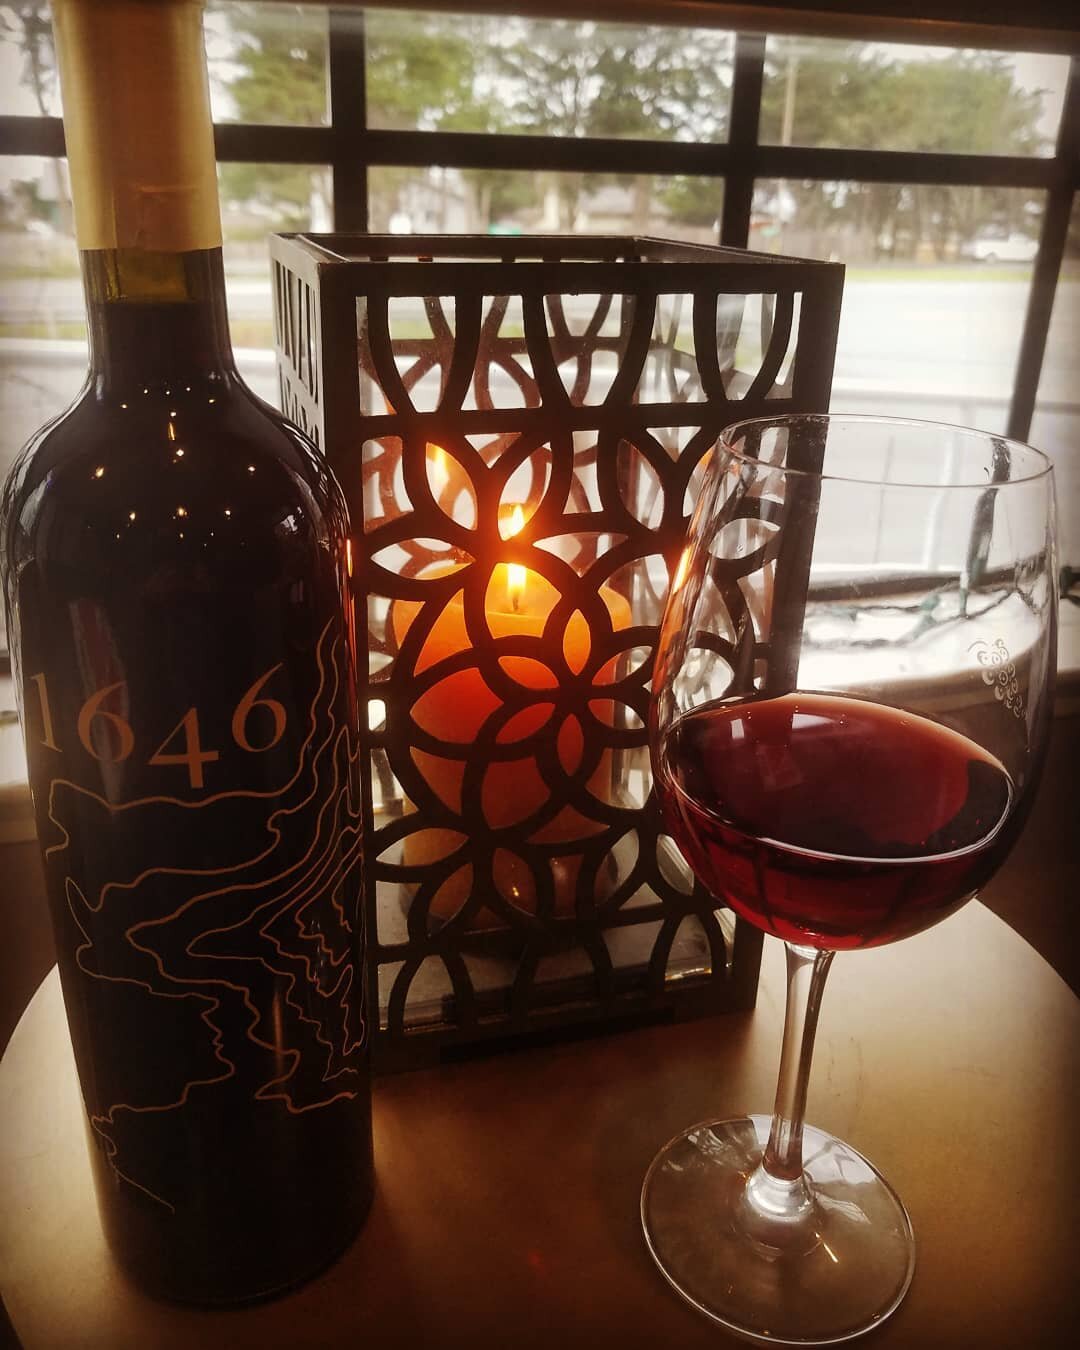 Today we're featuring Bella Grace Vineyard 1646 Amador Co. Red Blend. It's named for the elevation of their estate wine cave in Amador County. 1646 is a barrel selection of Barbera, Zinfandel, Primitivo and Petite Sirah. Dark stone fruit, holiday spi